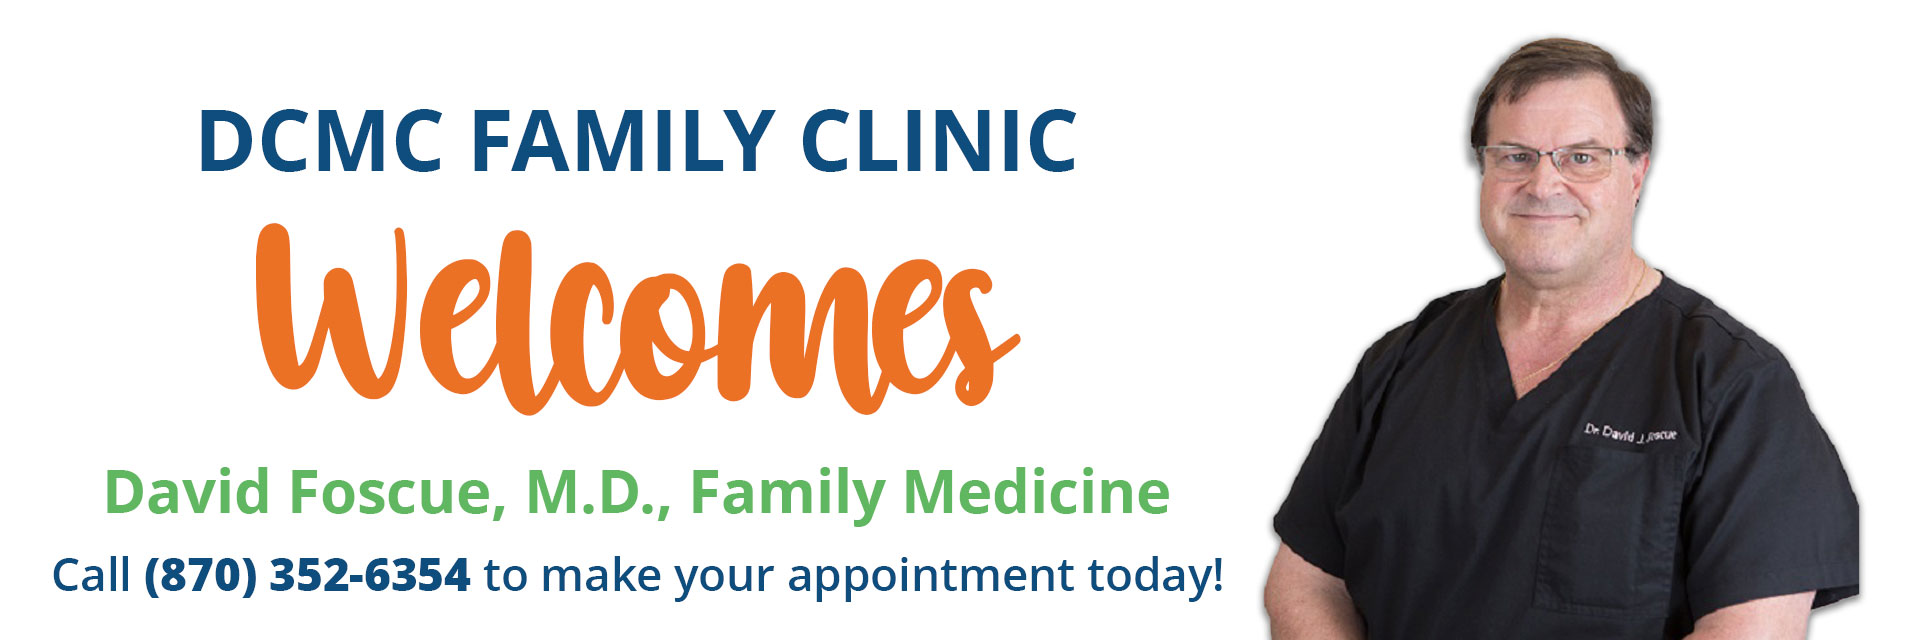 DCMC Family Clinic Welcomes David Foscue, M.D. Family Medicine

Call (870) 352-6354 to make your appointment today!